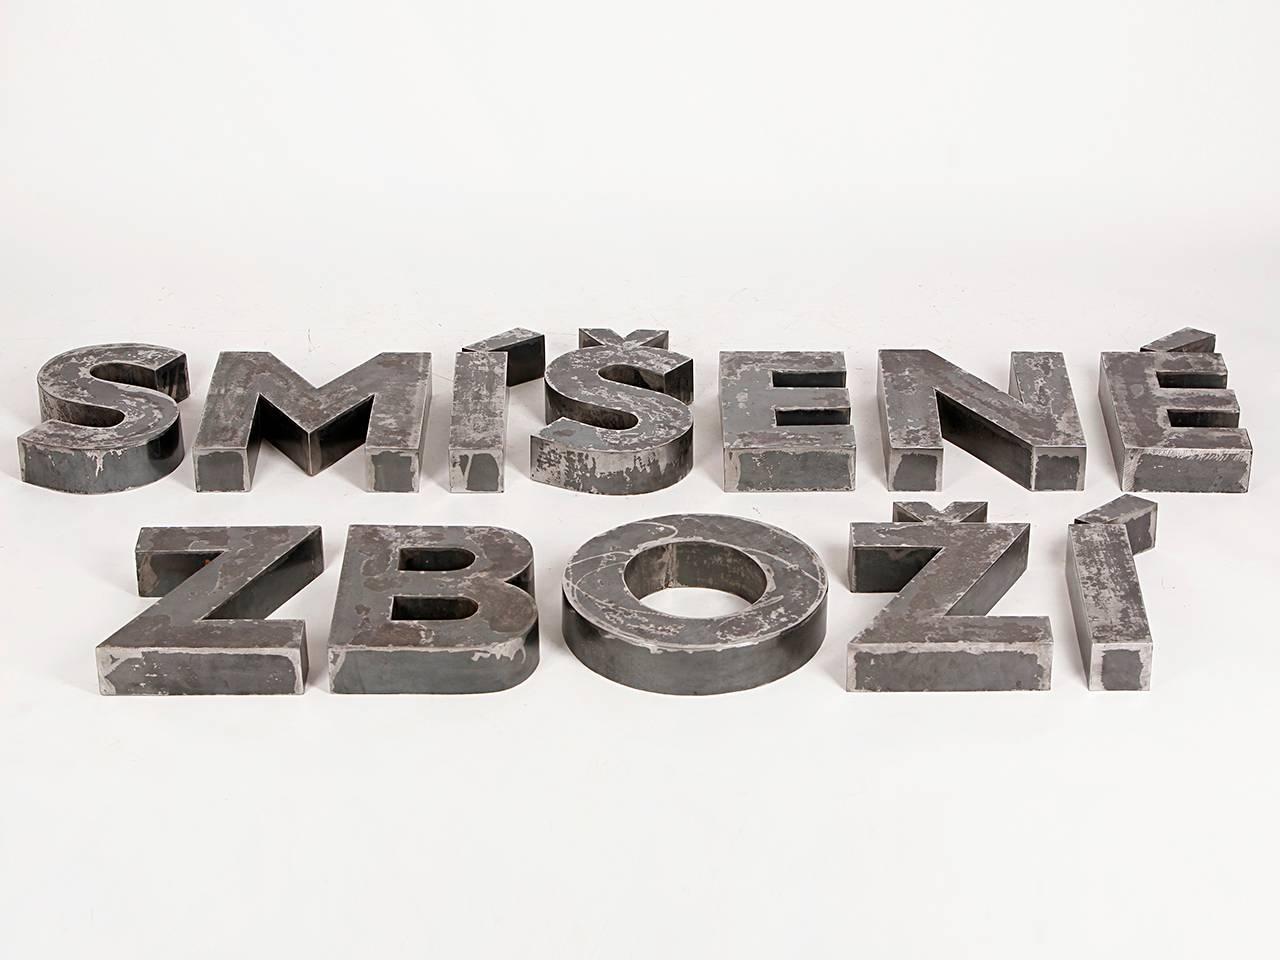 This set of shop sign letters is made of steel sheet and spells out the Czech words 